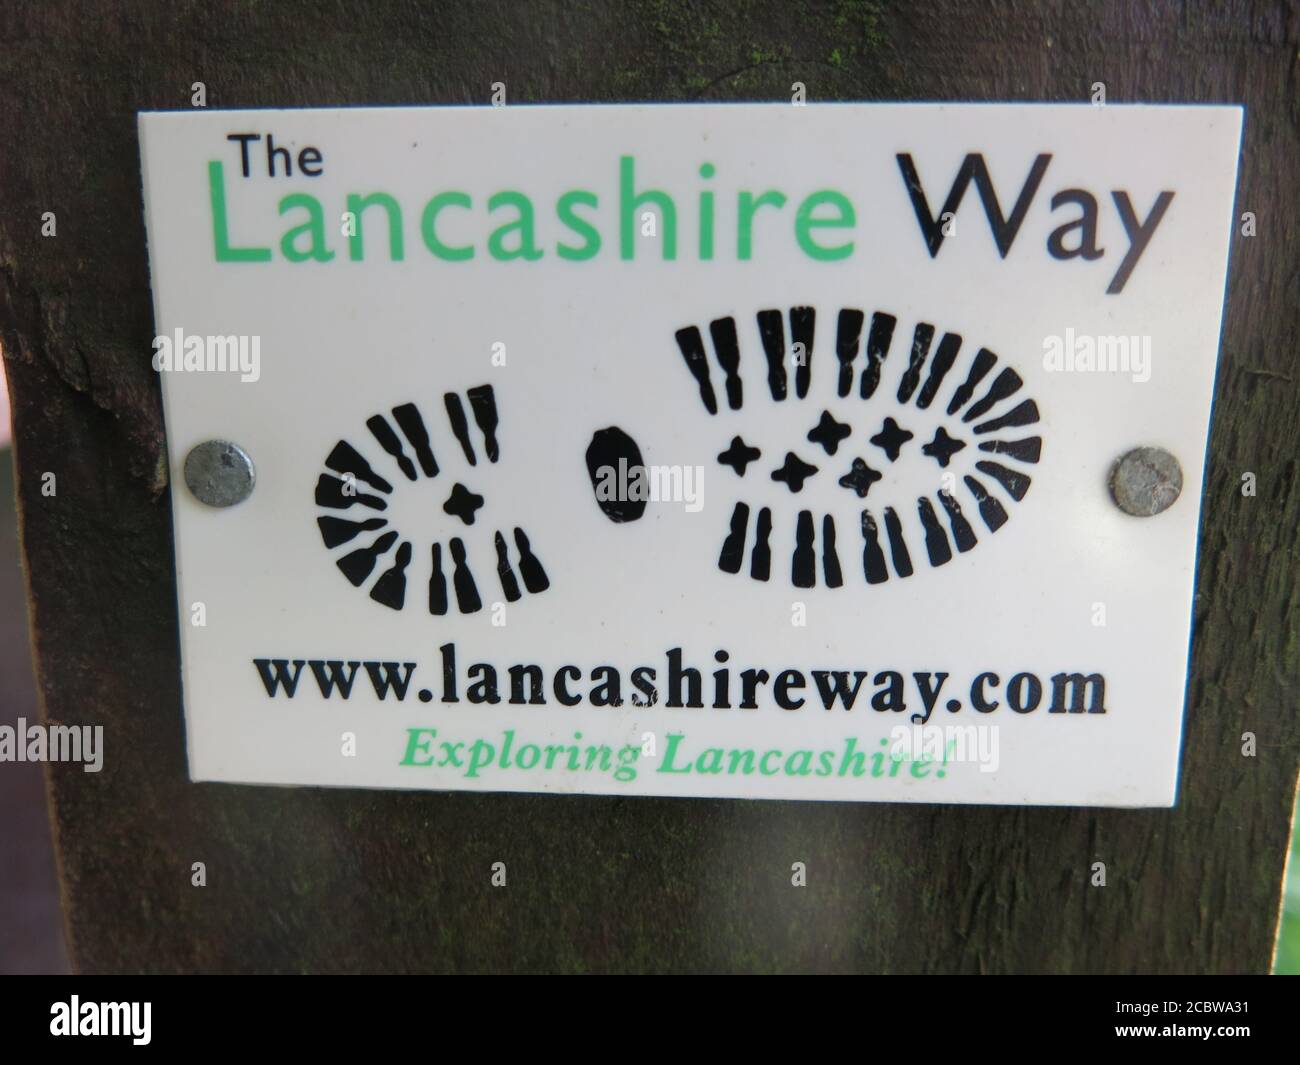 A signpost and logo marking the route of The Lancashire Way, a long distance footpath for walkers and hikers to explore the scenery of the county. Stock Photo